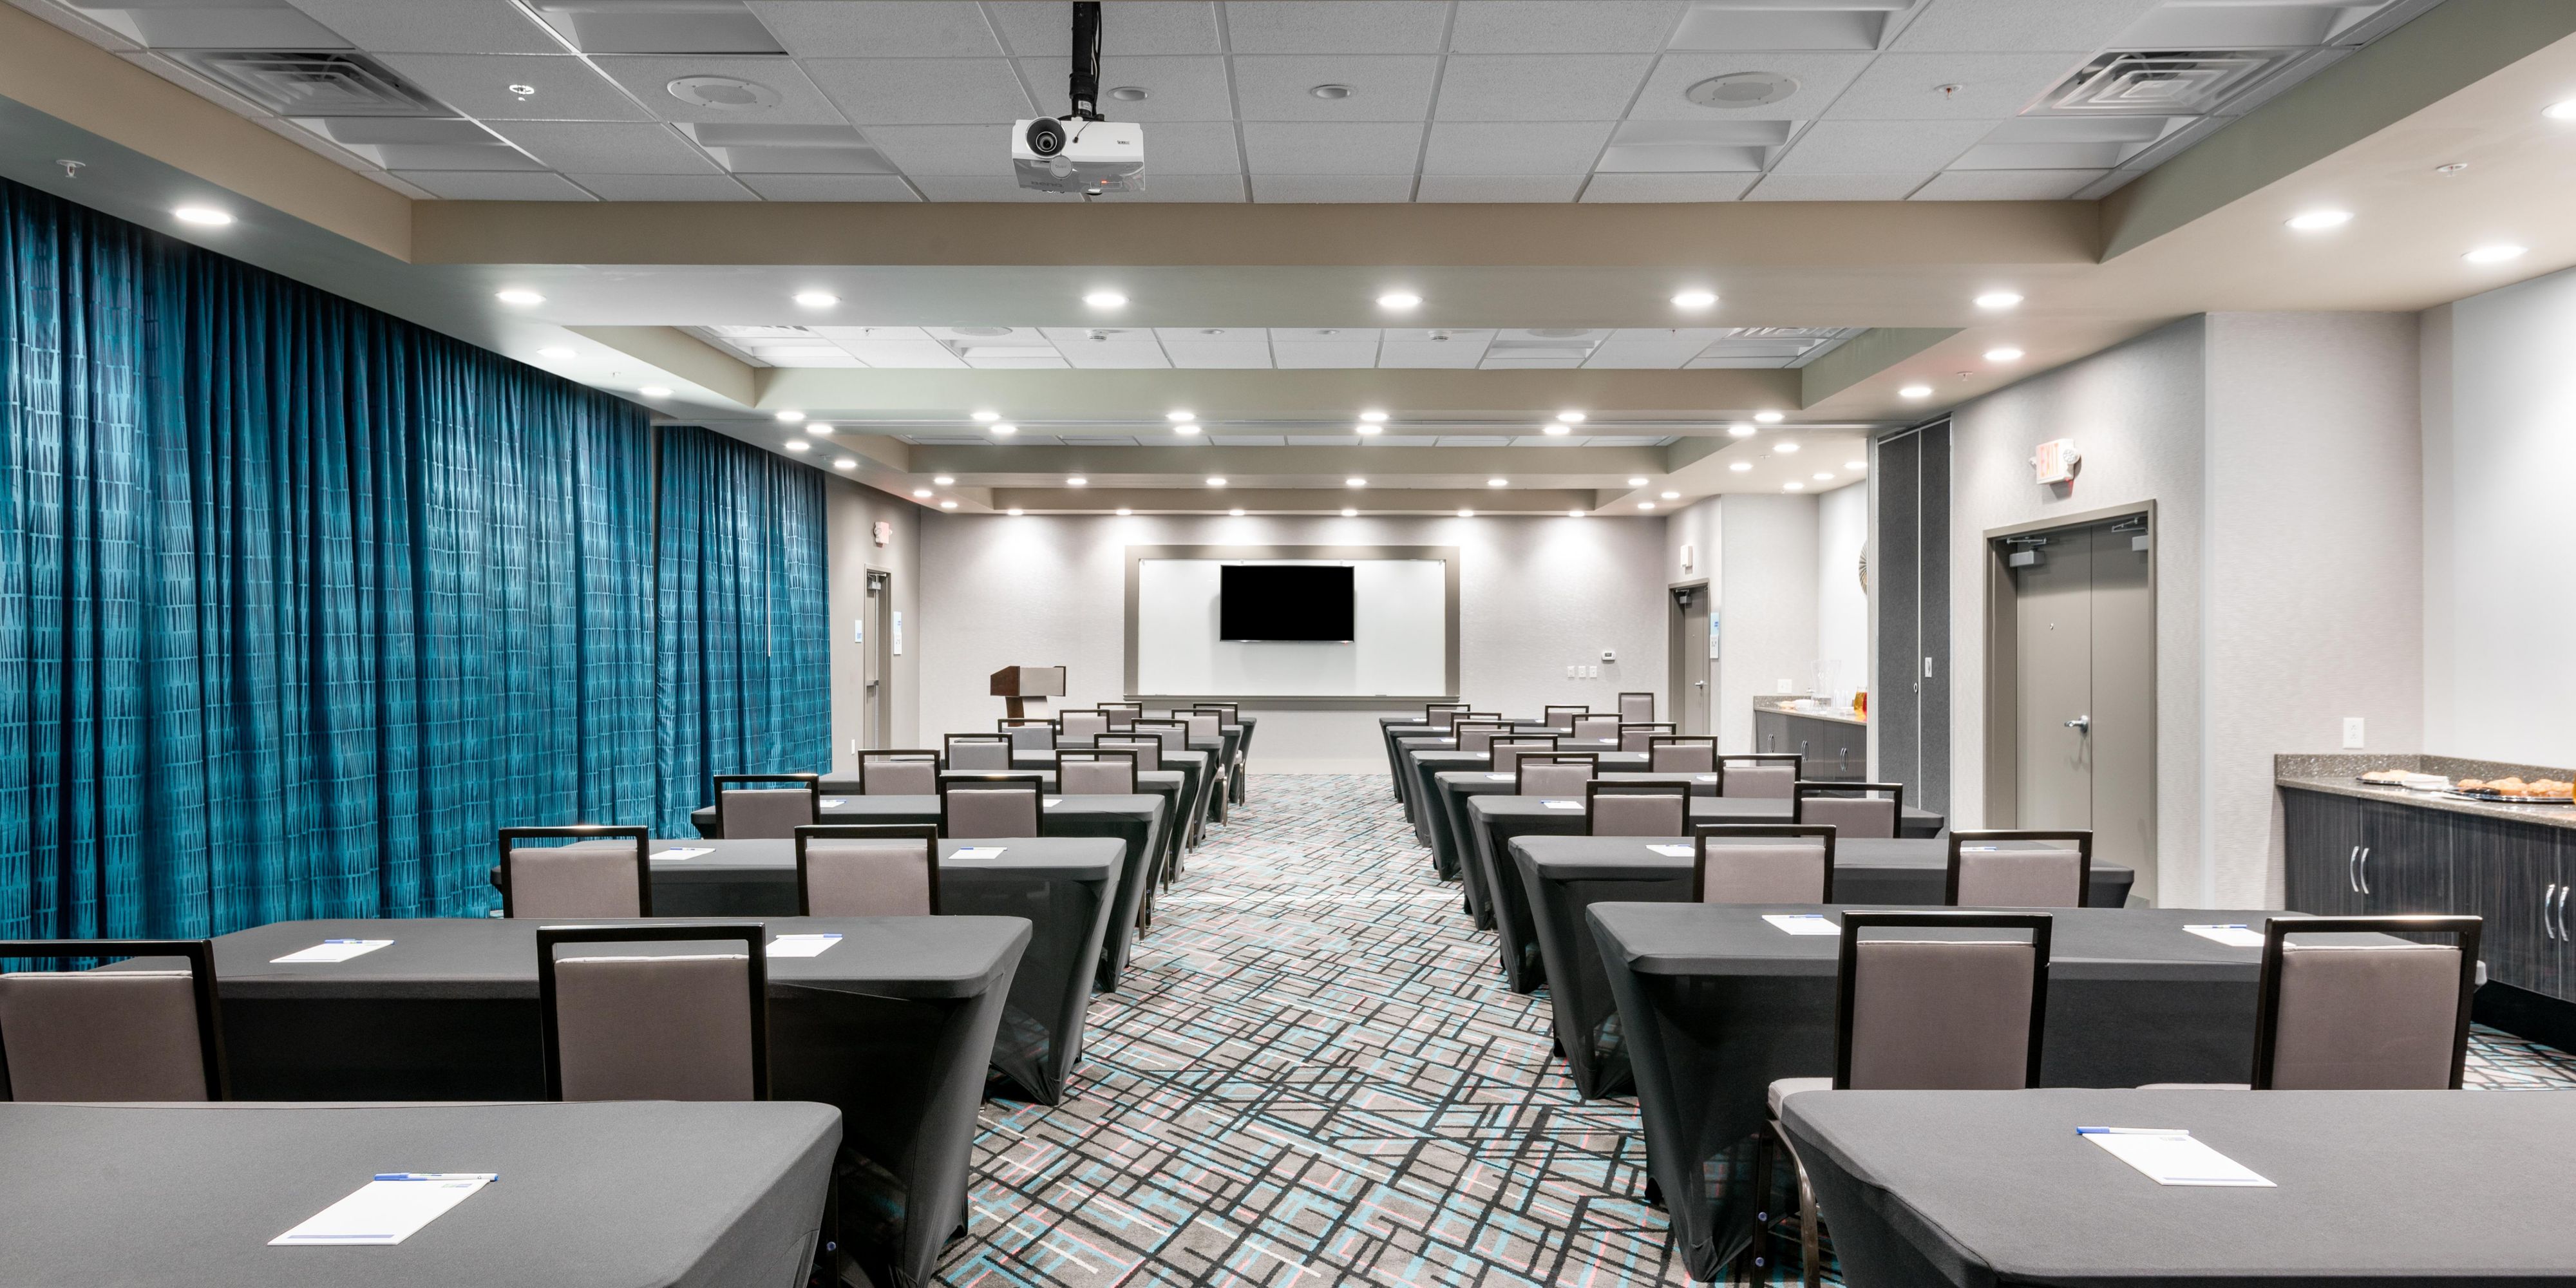 Elevate your meetings and events at our hotel, where exceptional service meets versatile spaces. Our dedicated team is committed to ensuring your gathering, whether it's a corporate meeting, a conference, or a special celebration, is a resounding success. With three flexible meeting rooms and 1600 sq ft of space, we're  here to help you succeed!